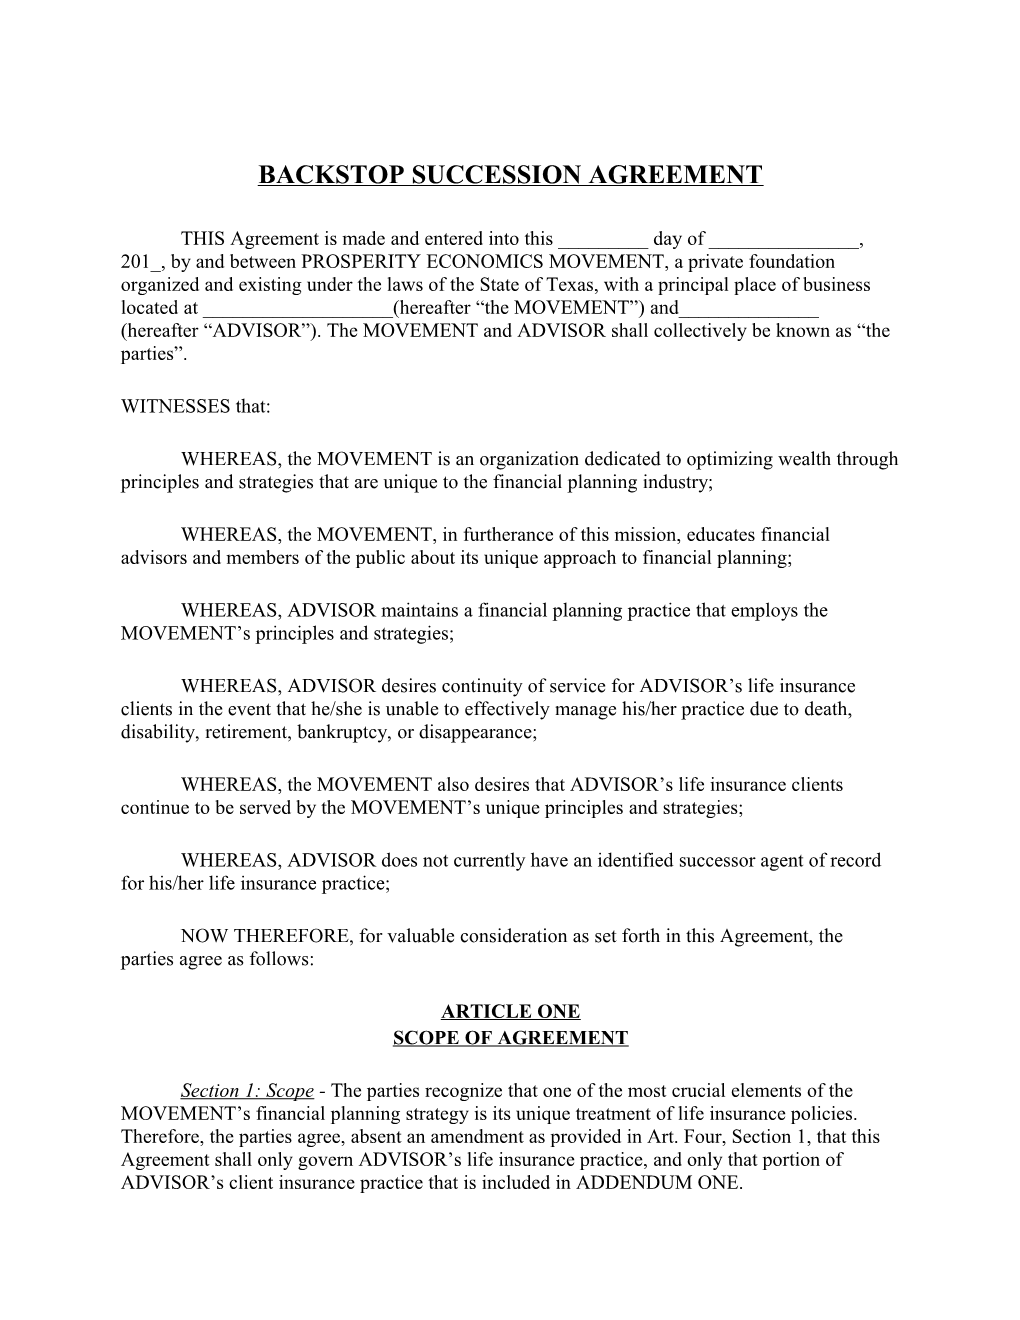 Backstop Succession Agreement